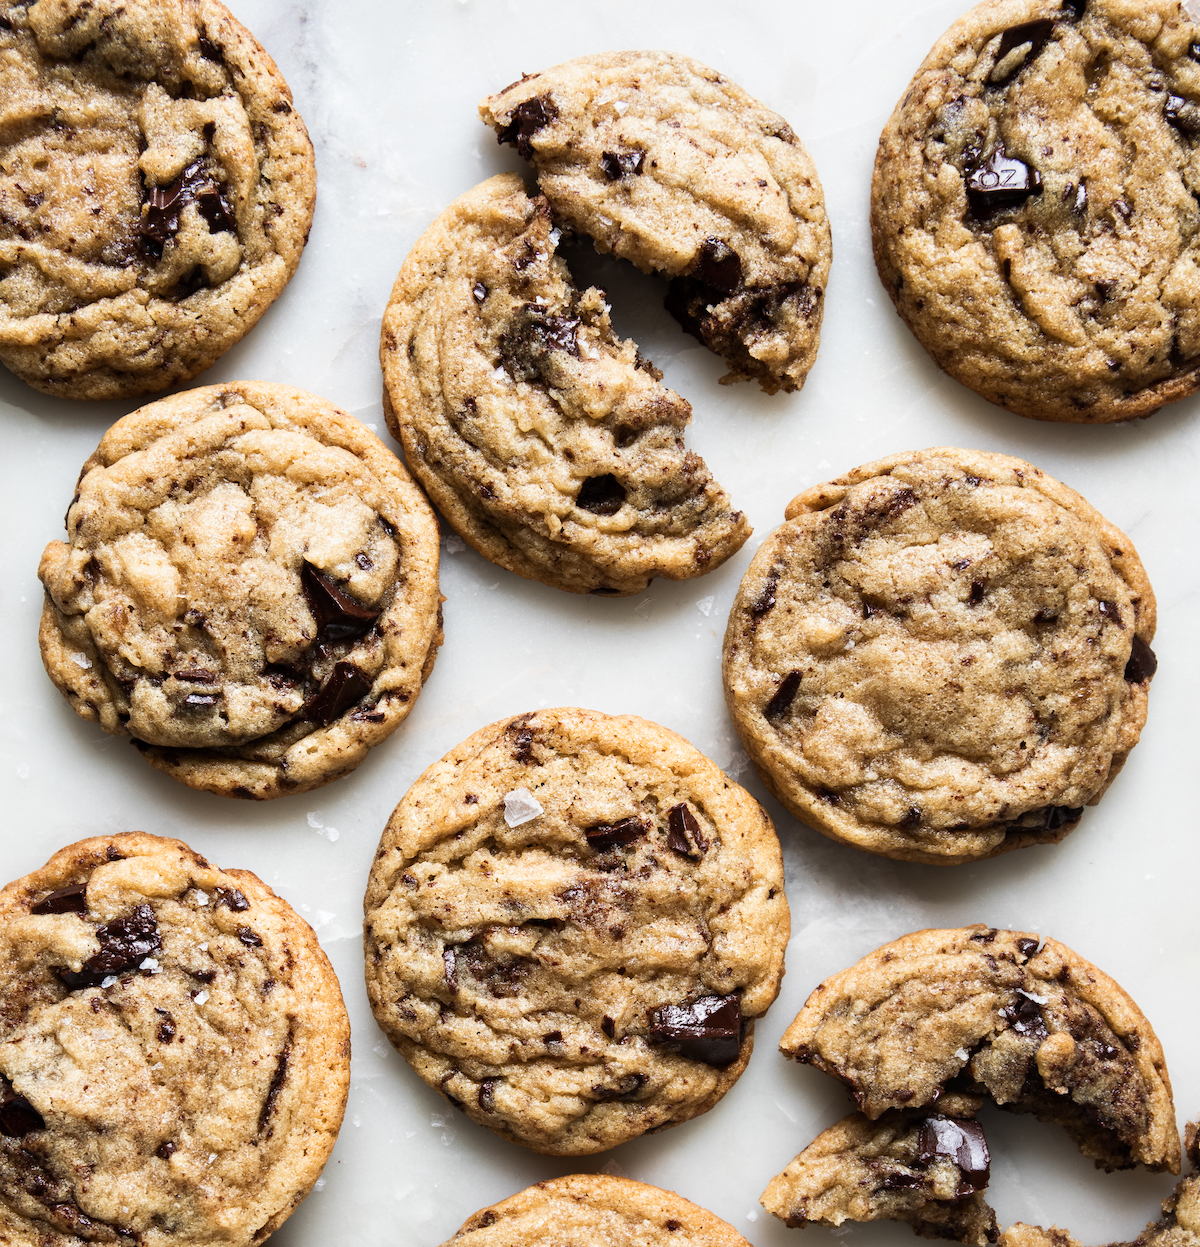 https://www.displacedhousewife.com/wp-content/uploads/2023/02/smal-batch-brown-butter-chocolate-chip-cookie-how-to-6014-copy.jpg